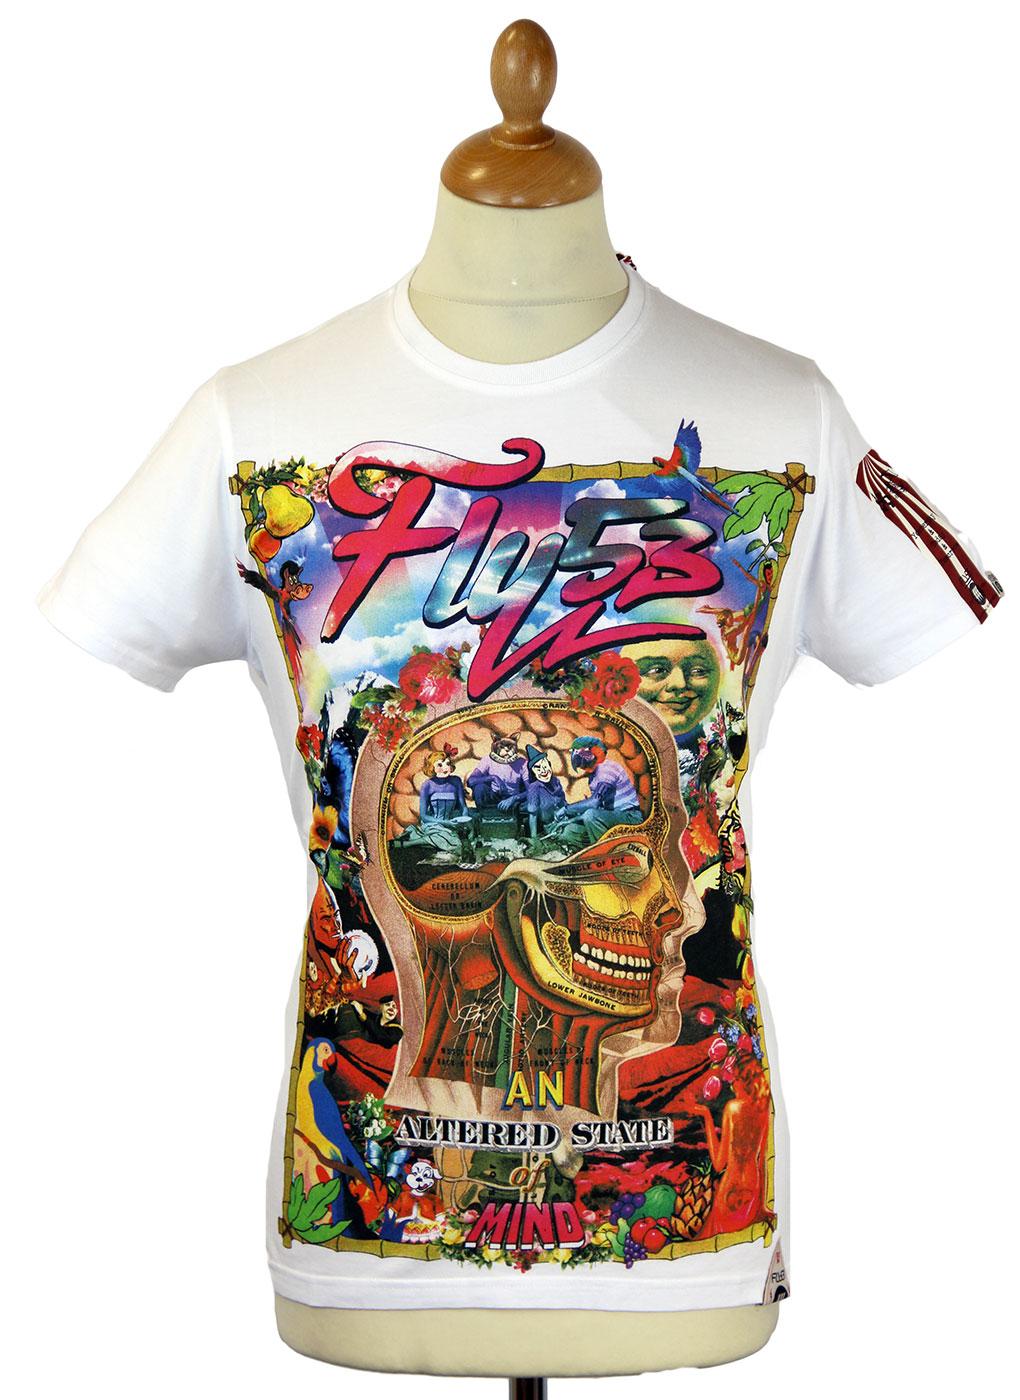 Leary FLY53 Retro 60s Psychedelic Montage T-Shirt